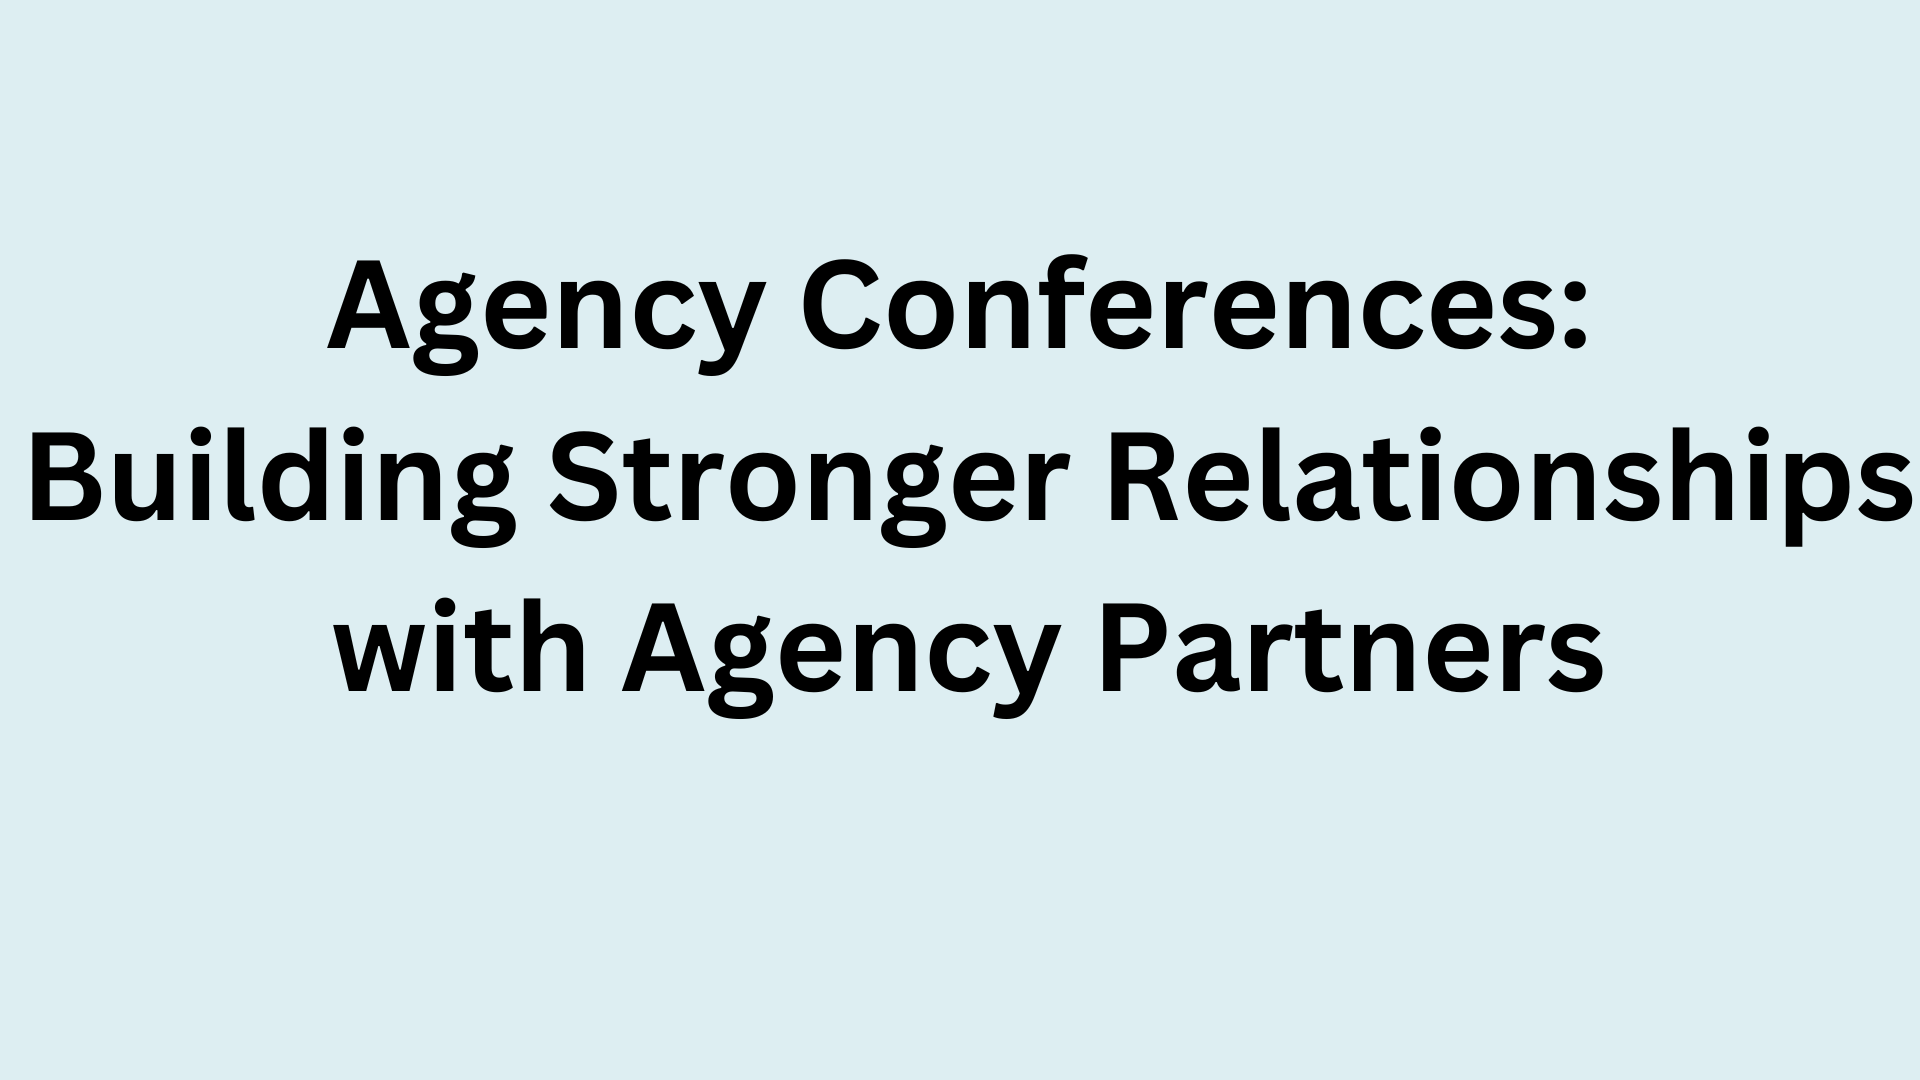 Agency Conferences: Building Stronger Relationships with Agency Partners